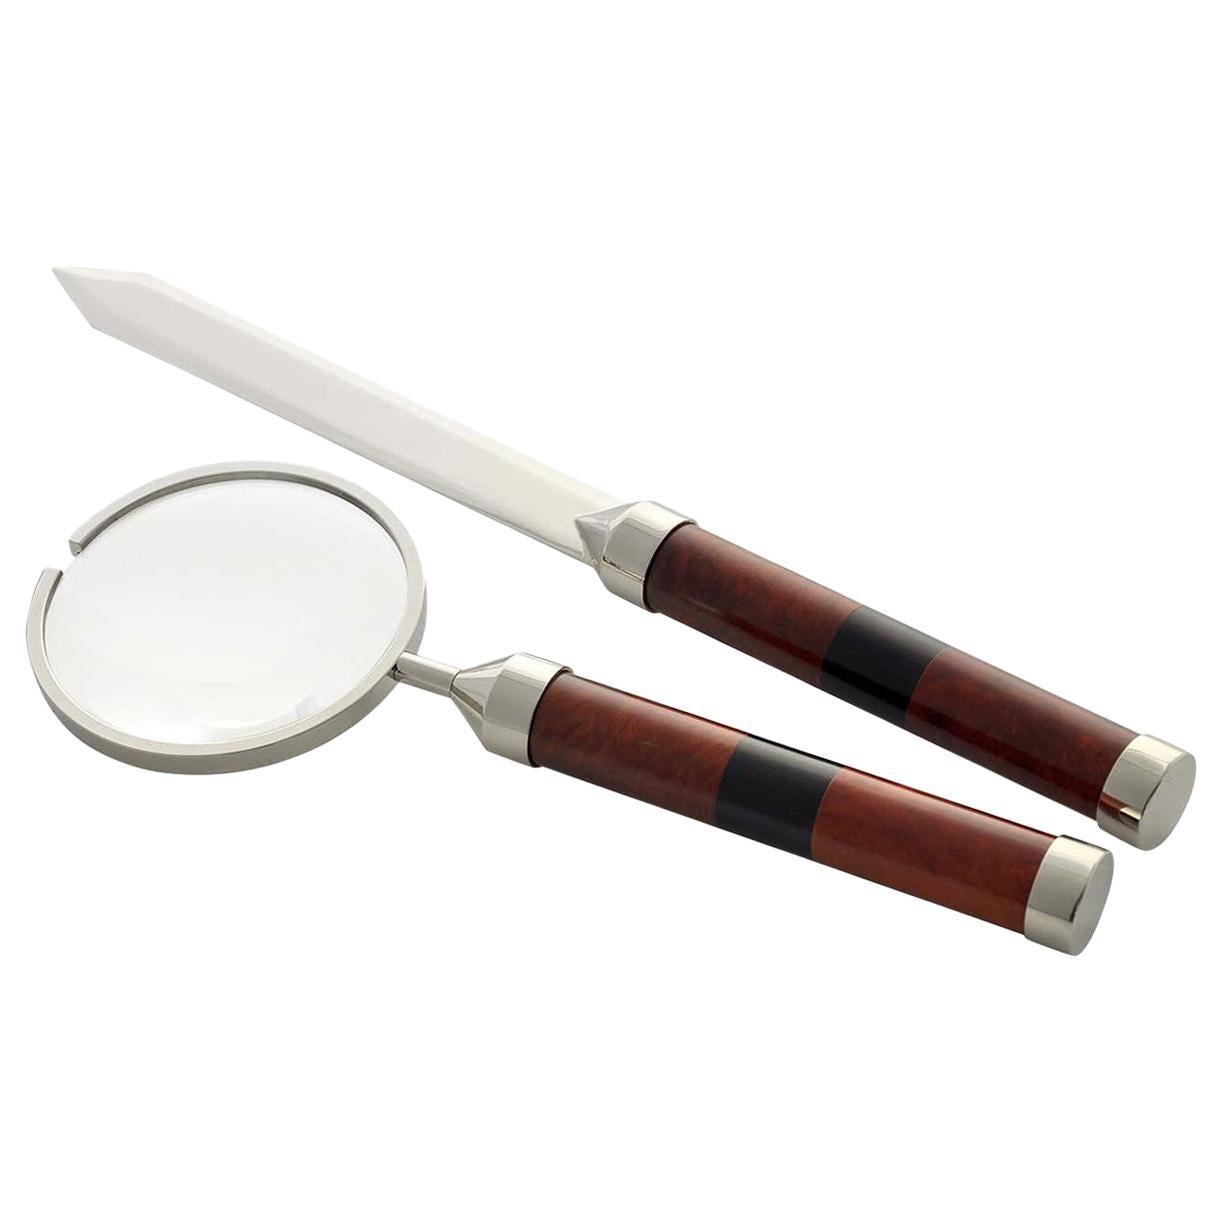 Essenze Magnifying Glass and Letter Opener Set by Nino Basso For Sale